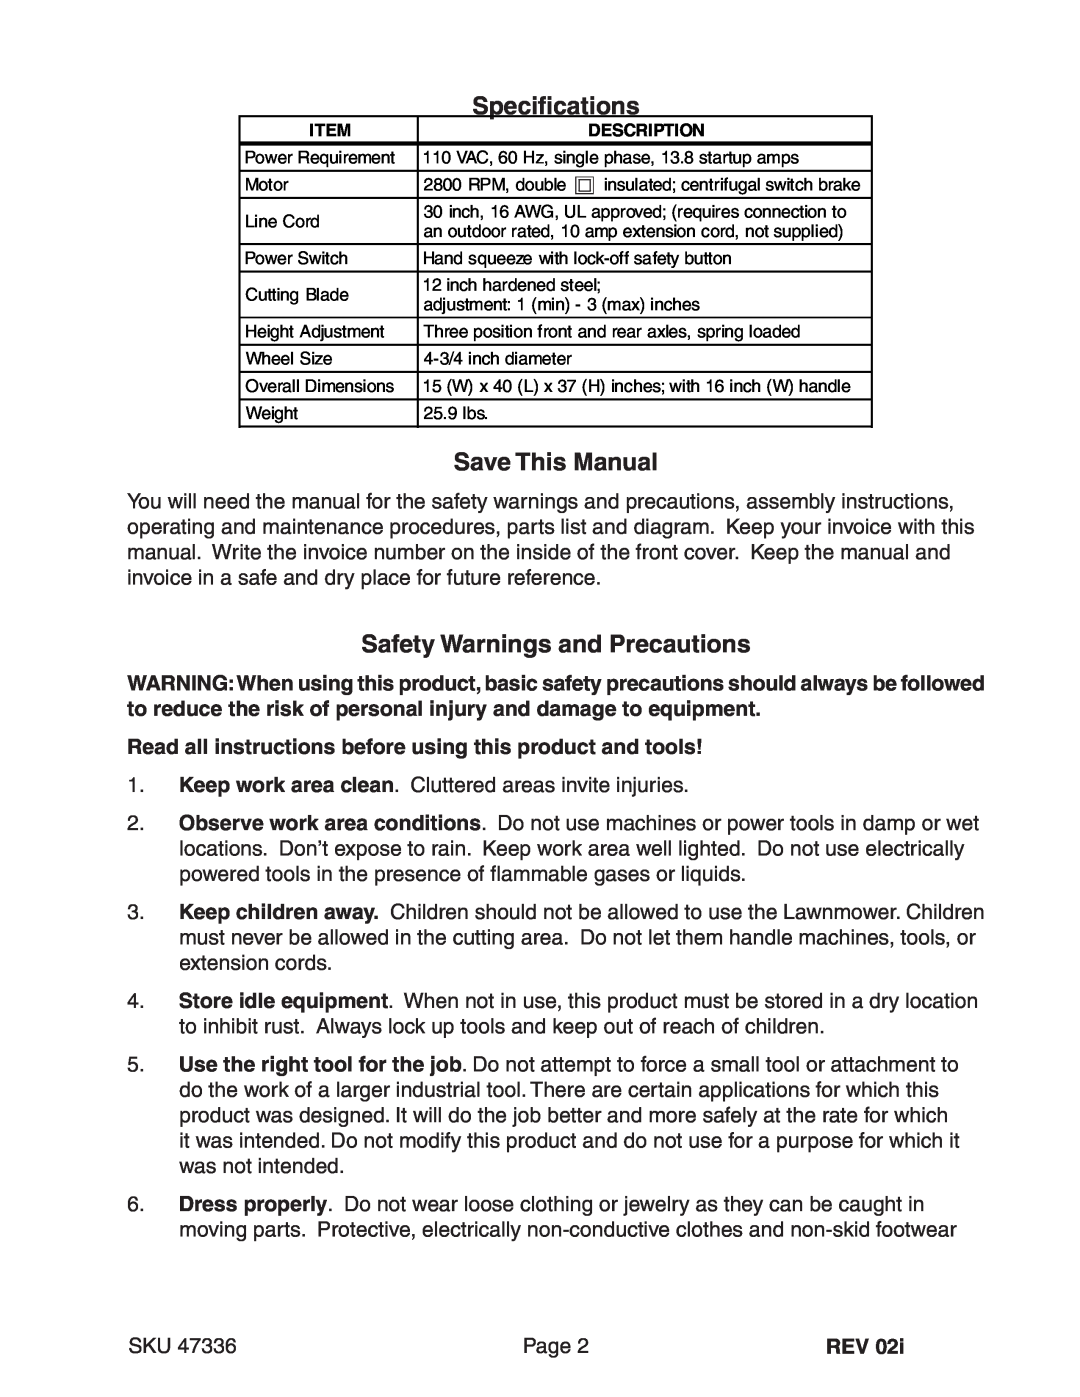 Harbor Freight Tools 47336 manual Specifications, Save This Manual, Safety Warnings and Precautions 